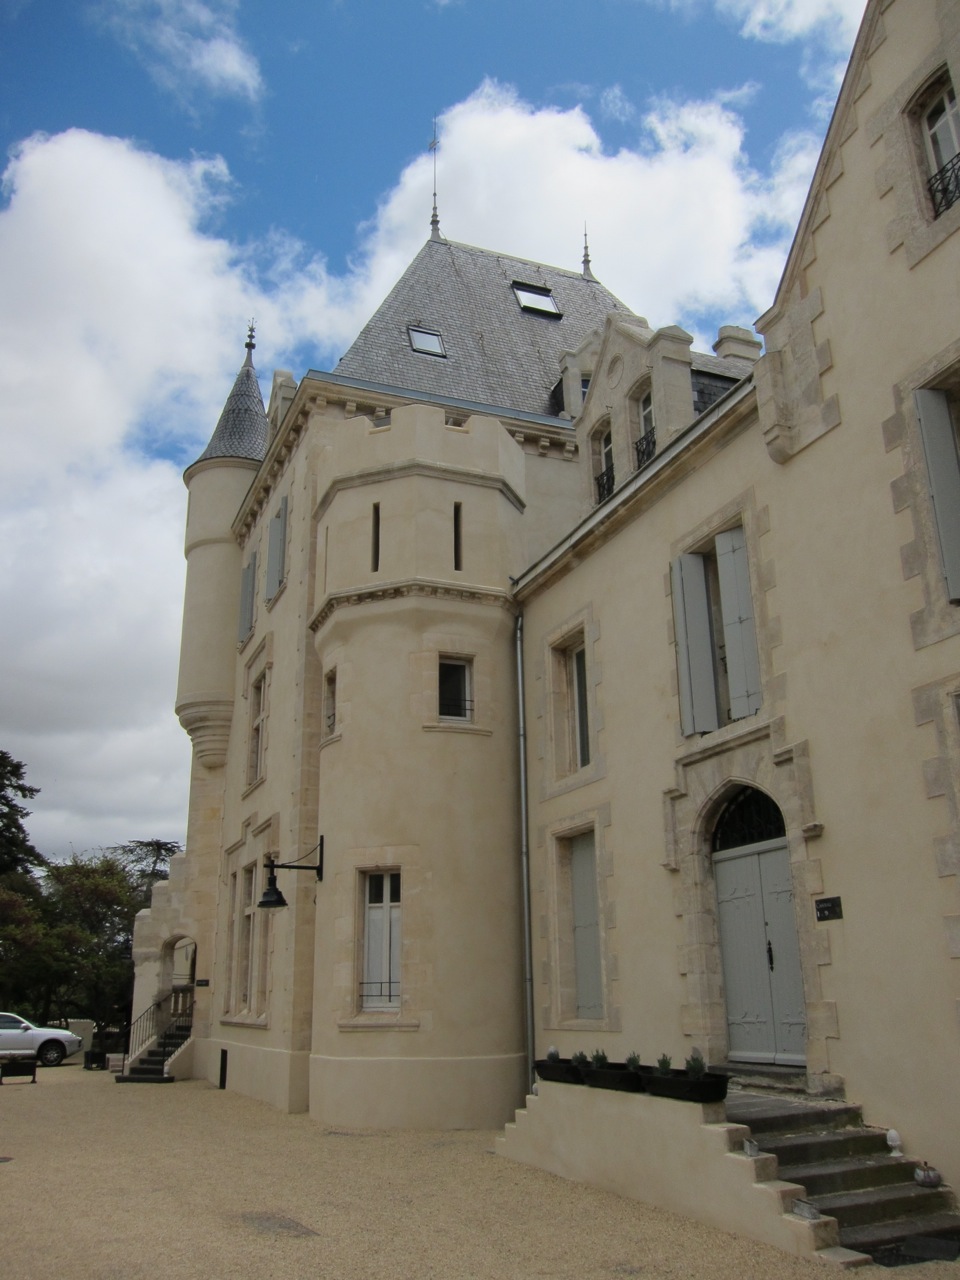 Château Les Carasses, the hotel complex that hosted Millésimes en Languedoc, was actually built thanks to the fortunes made in high-volume Languedoc wine in the 19th Century.